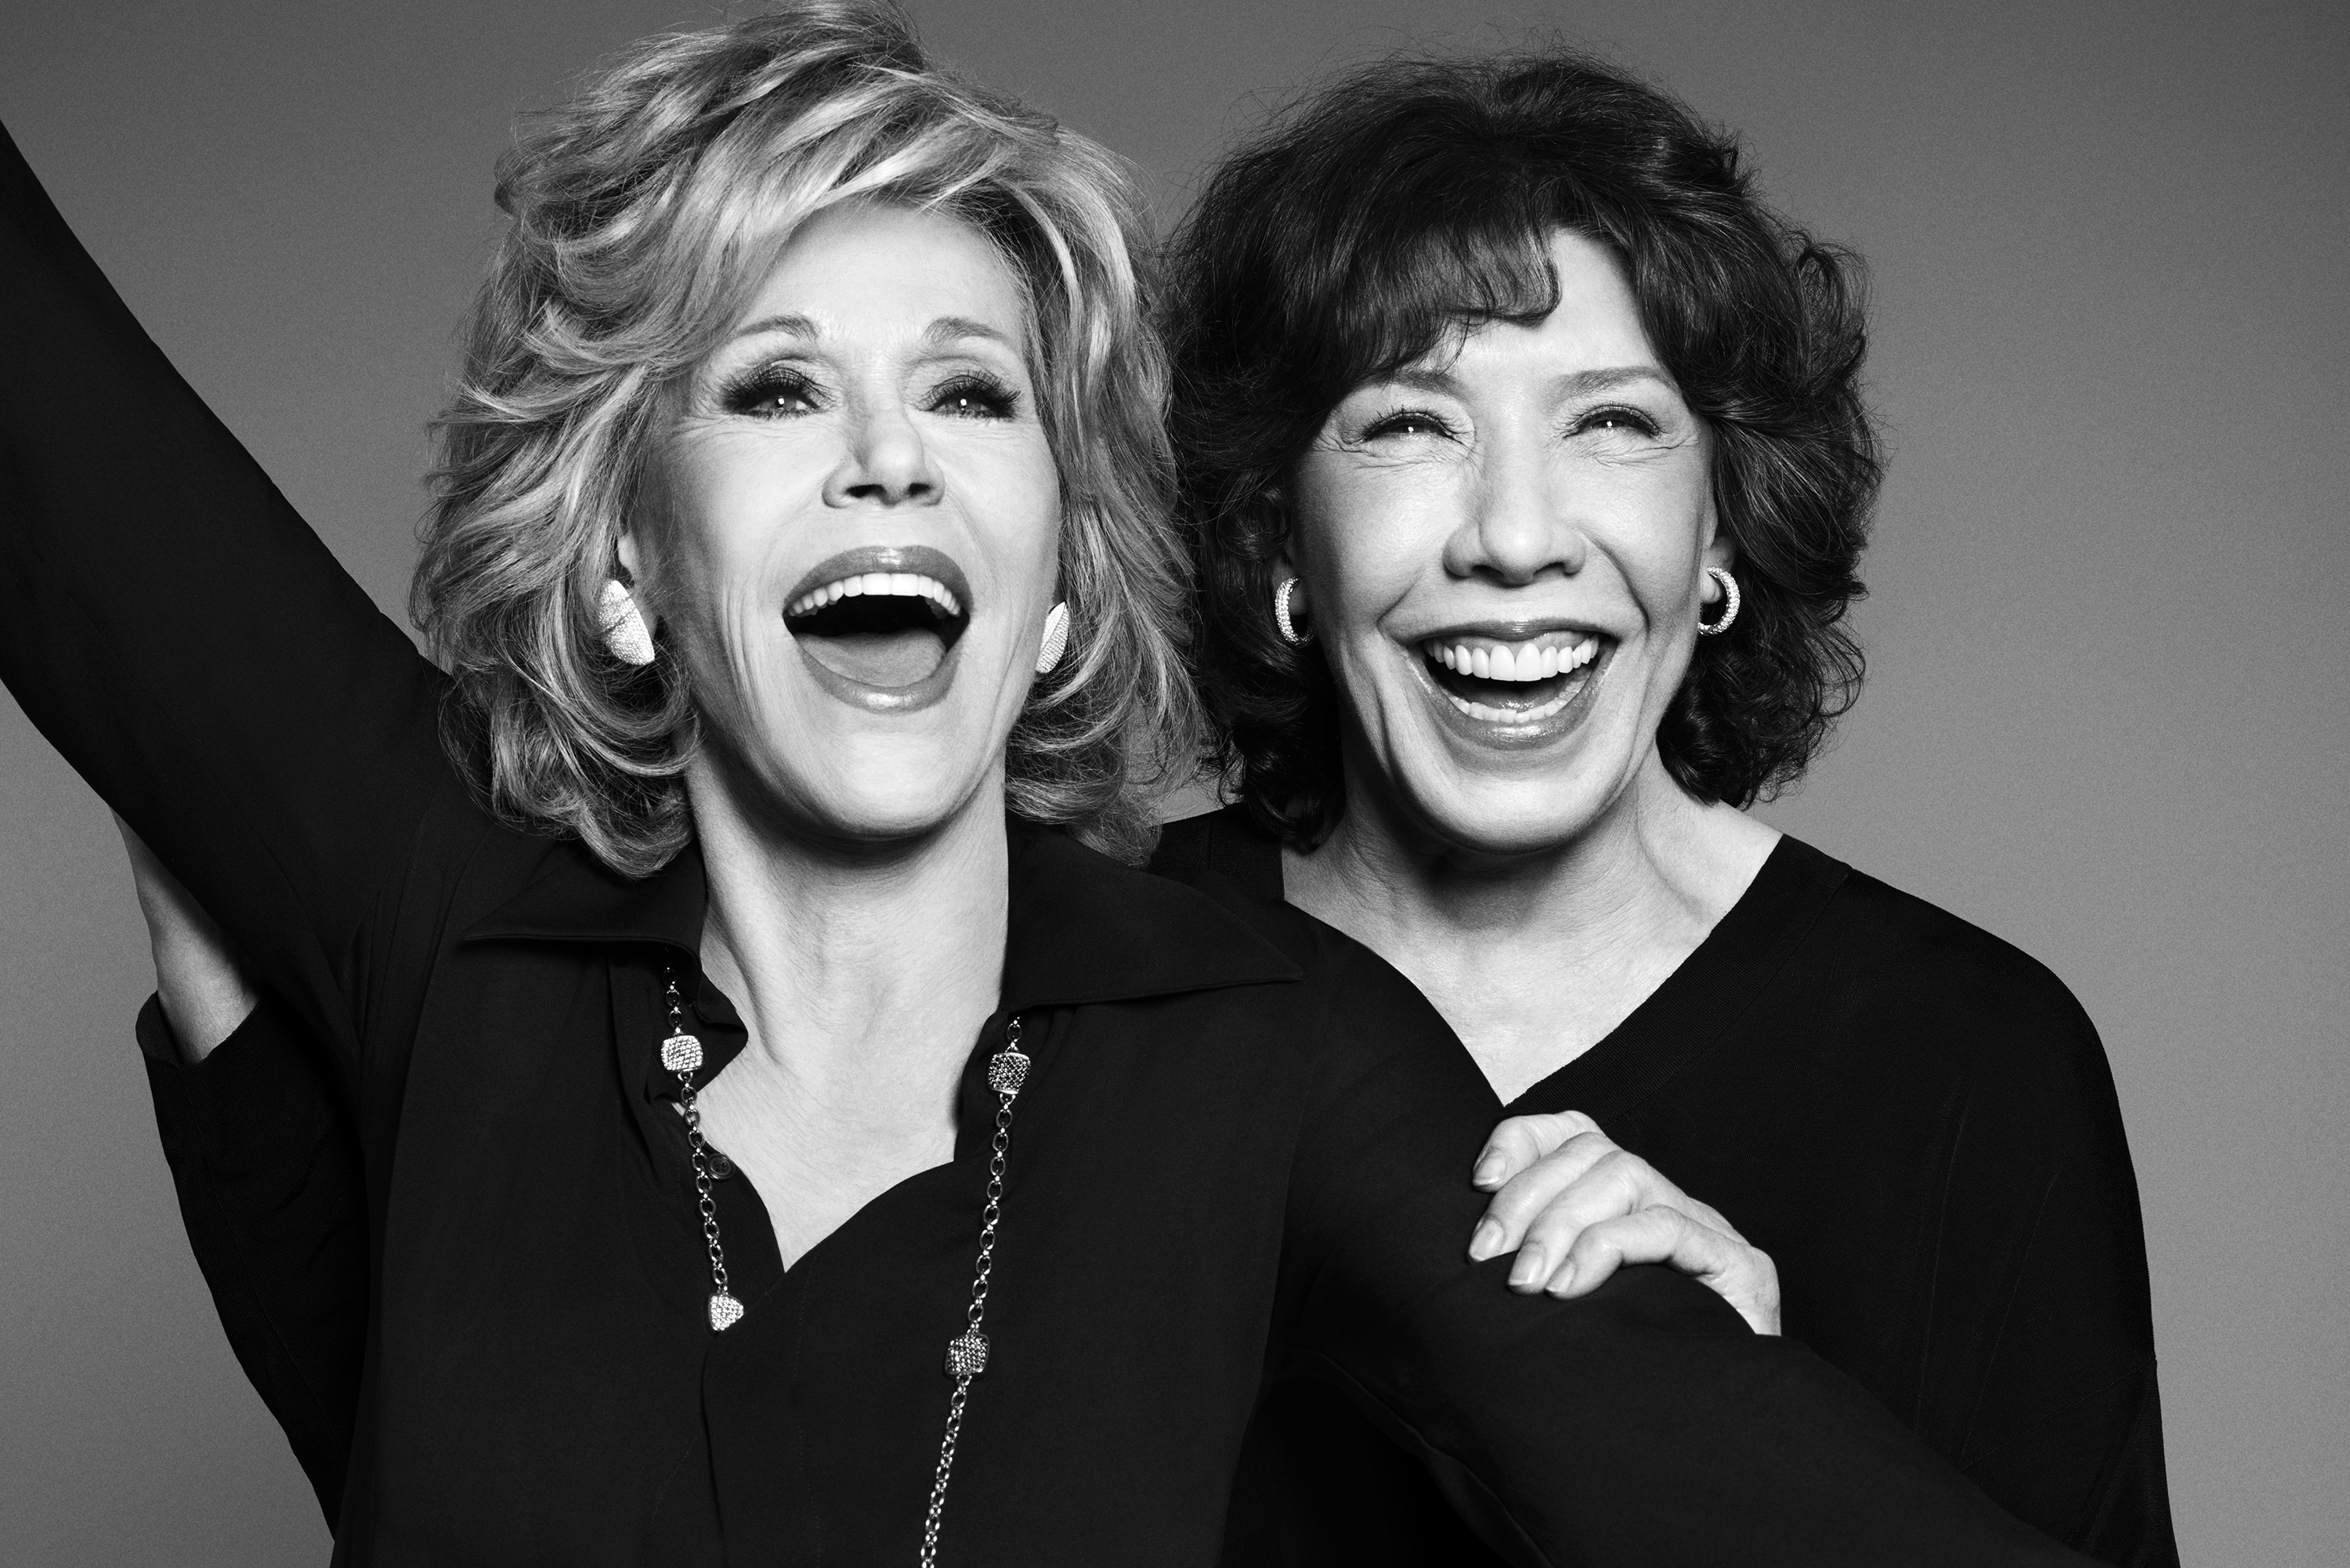 Queens of comedy: Old friends Fonda and Tomlin team up for their first project together in 35 years. (Paola Kudacki for TIME)